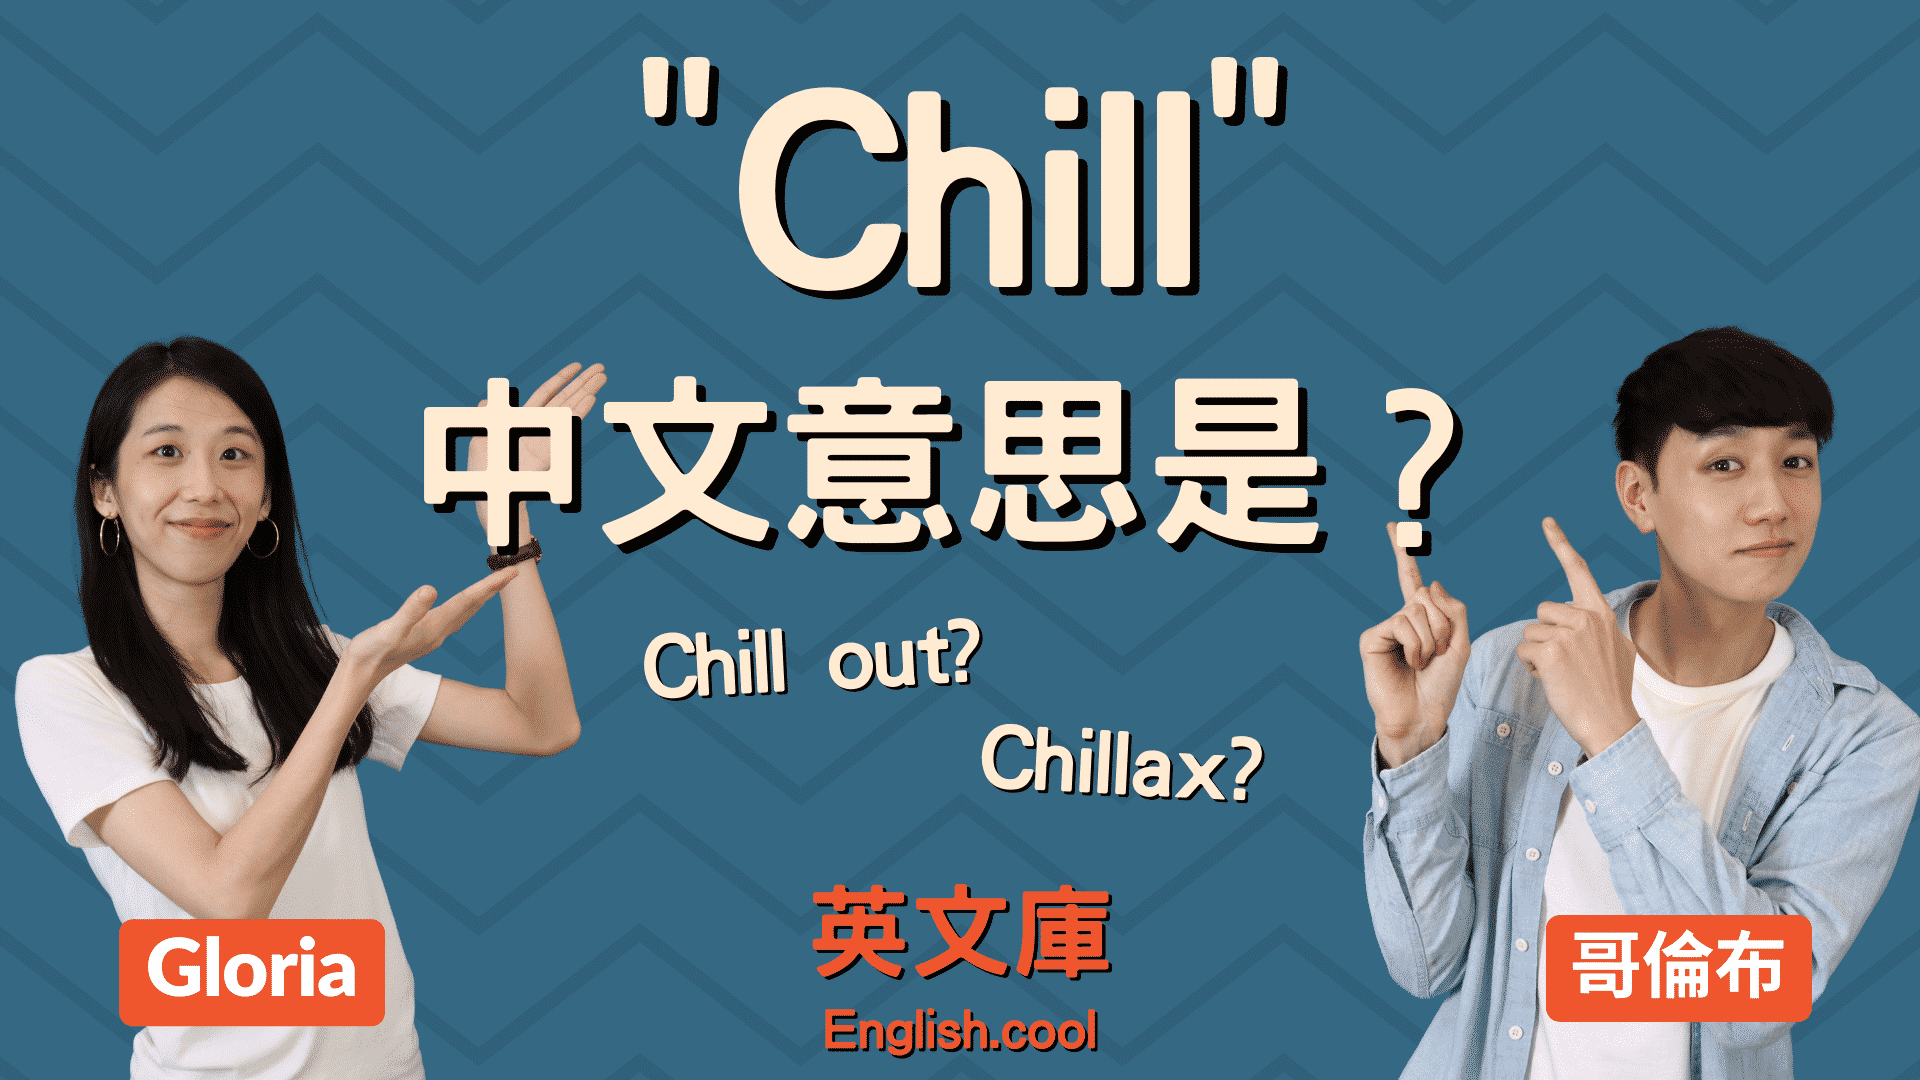 You are currently viewing Chill 中文意思是什麼？ 來搞懂 Chill、Chill Out、Chillax 的意思！